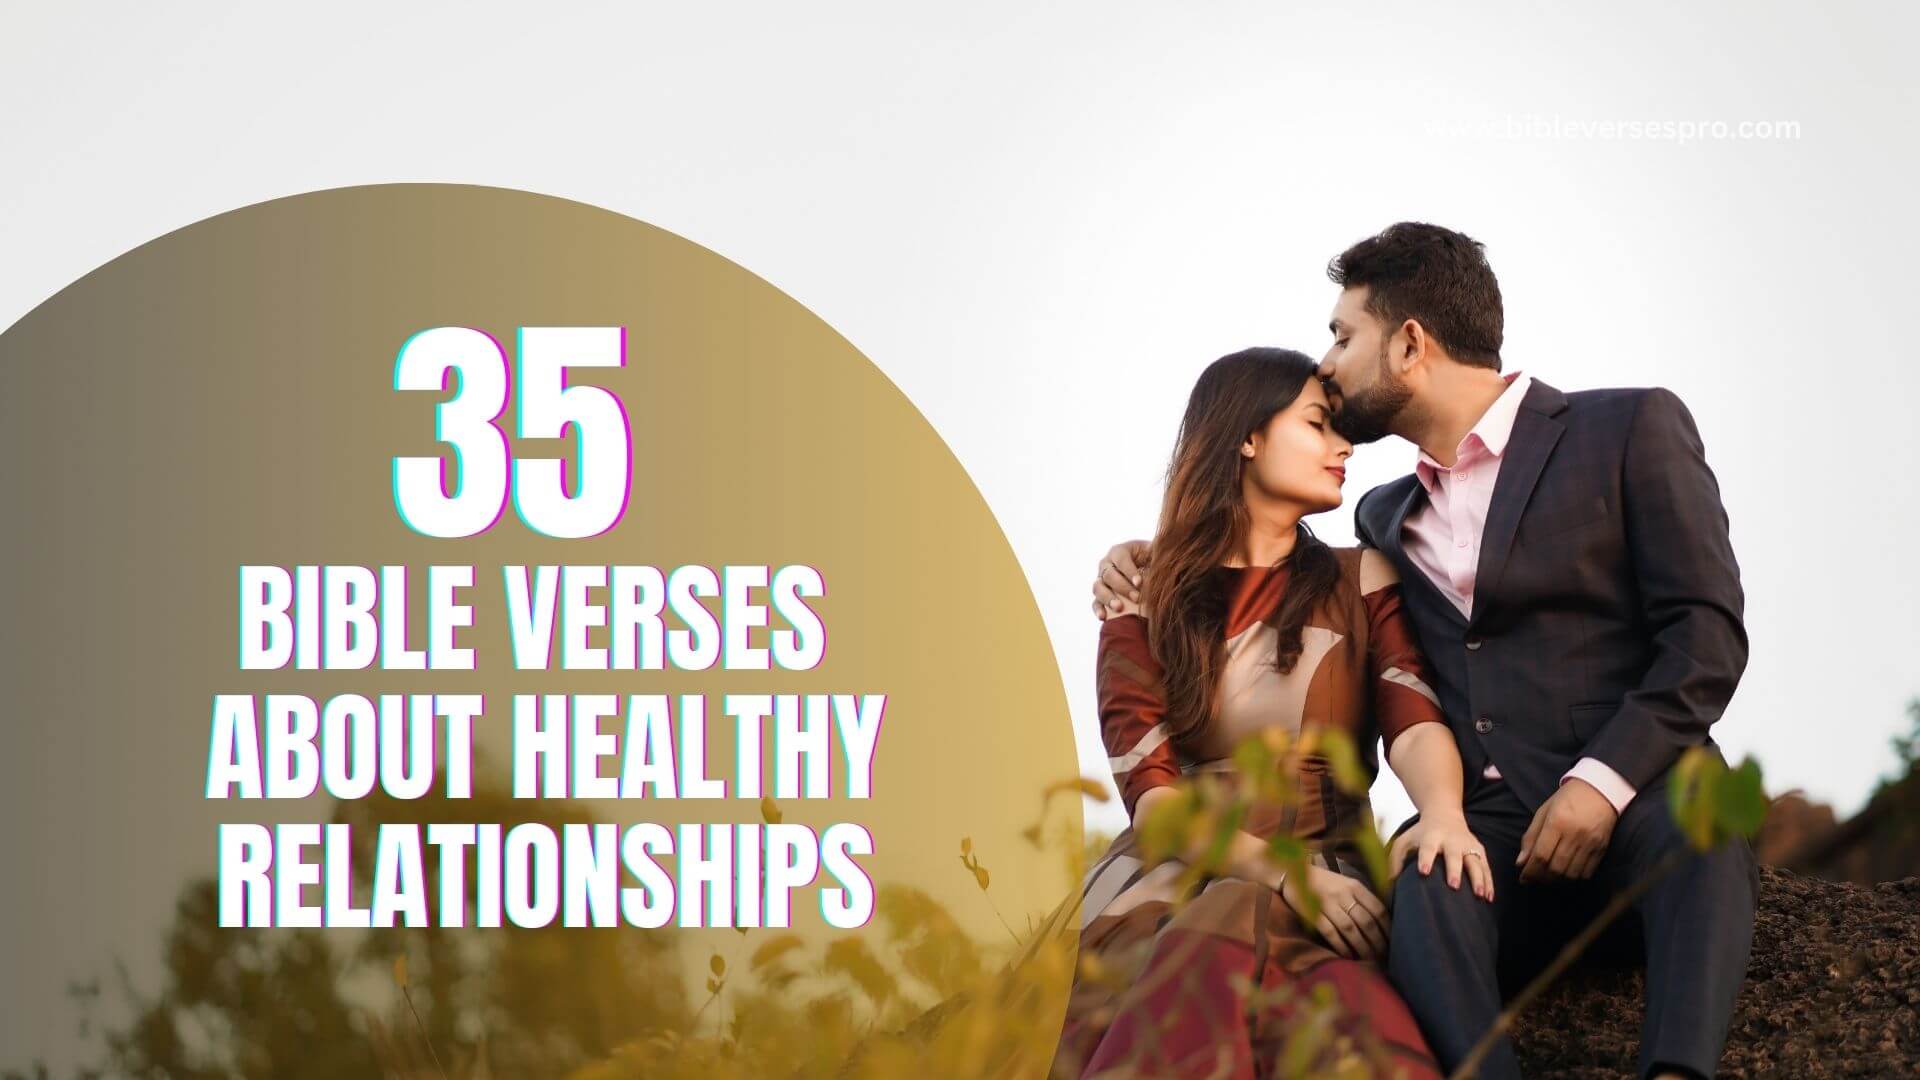 BIBLE VERSES ABOUT HEALTHY RELATIONSHIPS (1)